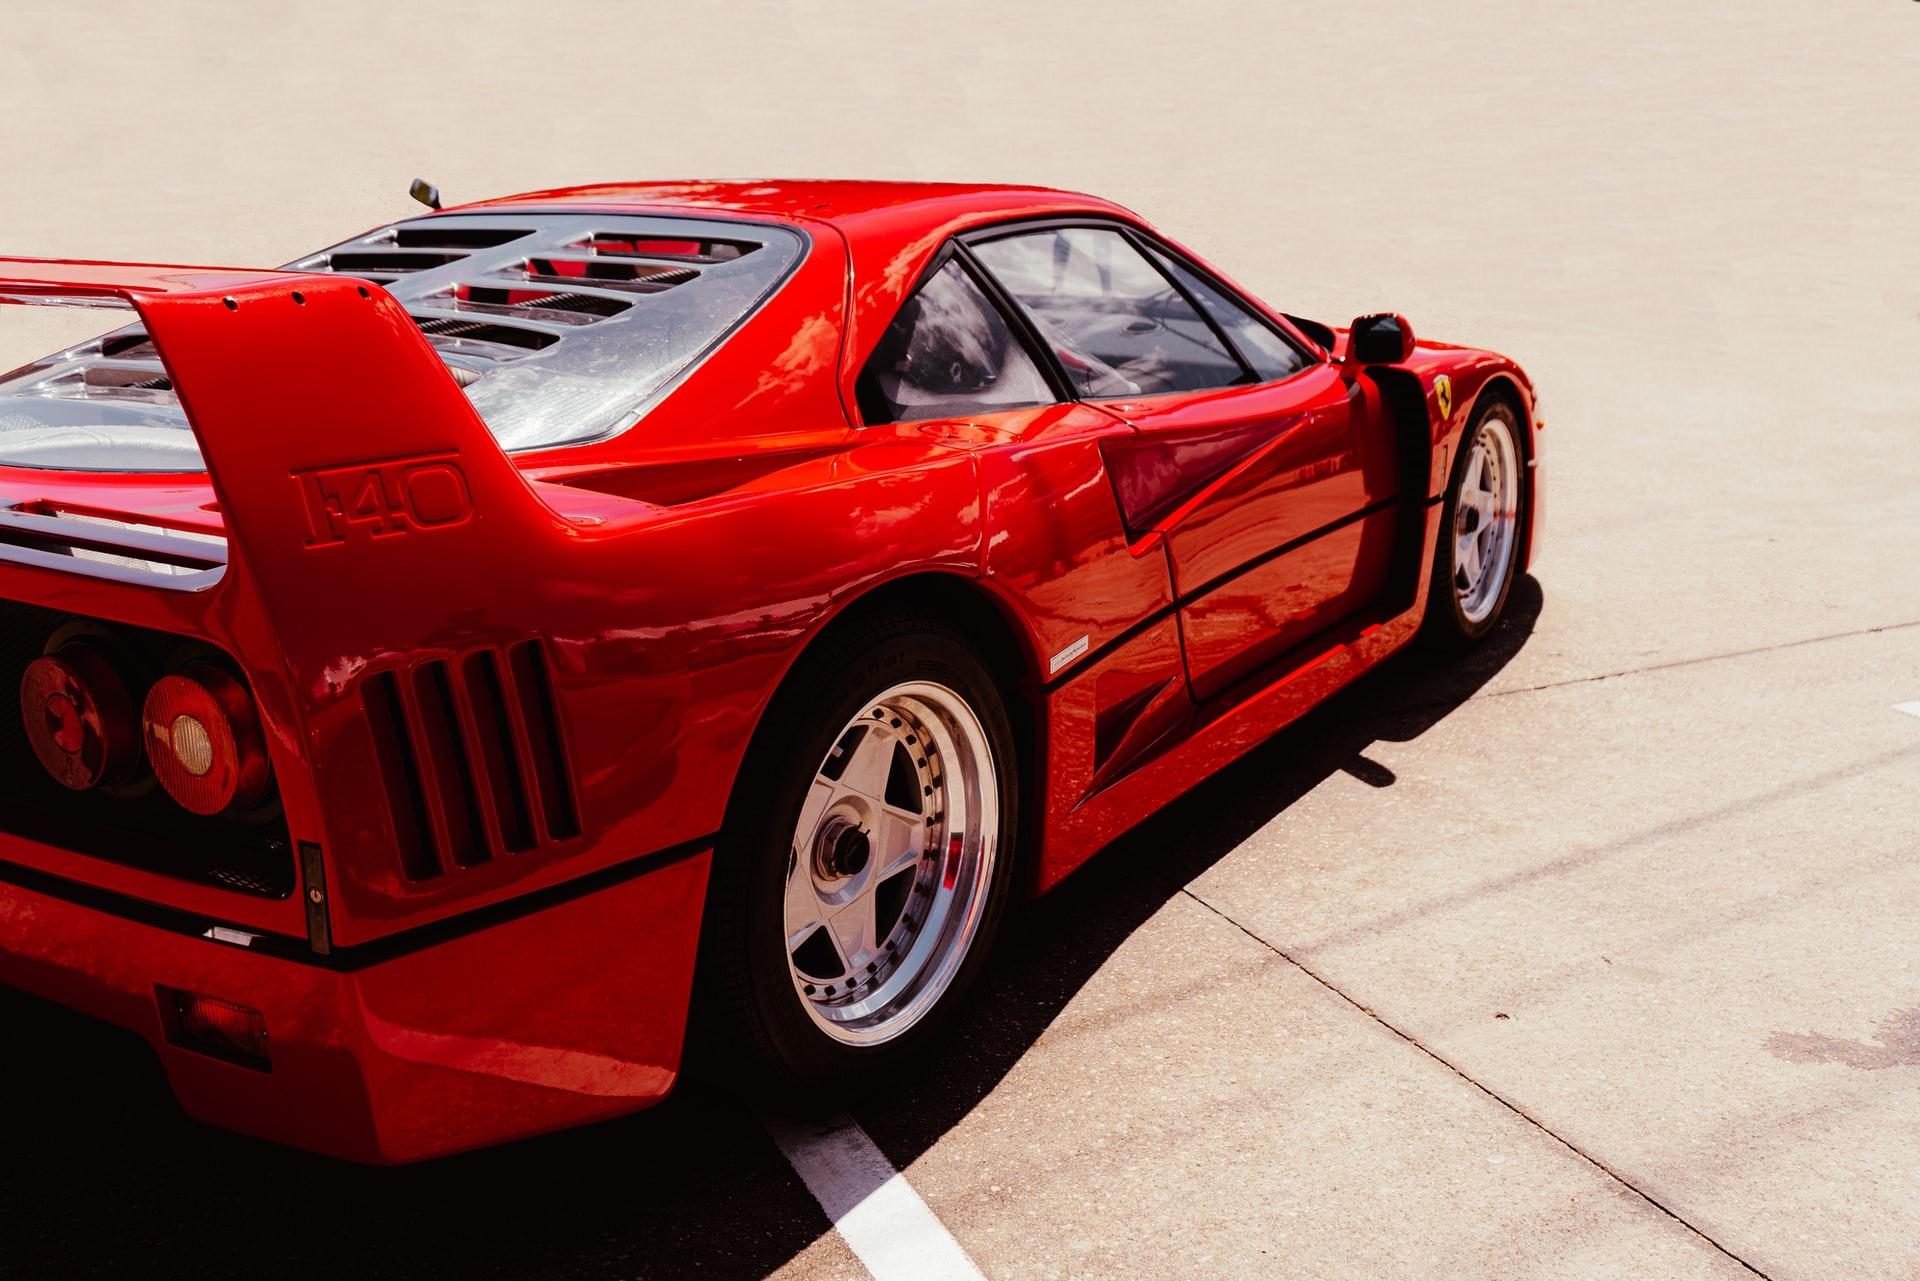 Let’s revisit some of the most iconic Ferrari models of all time. 